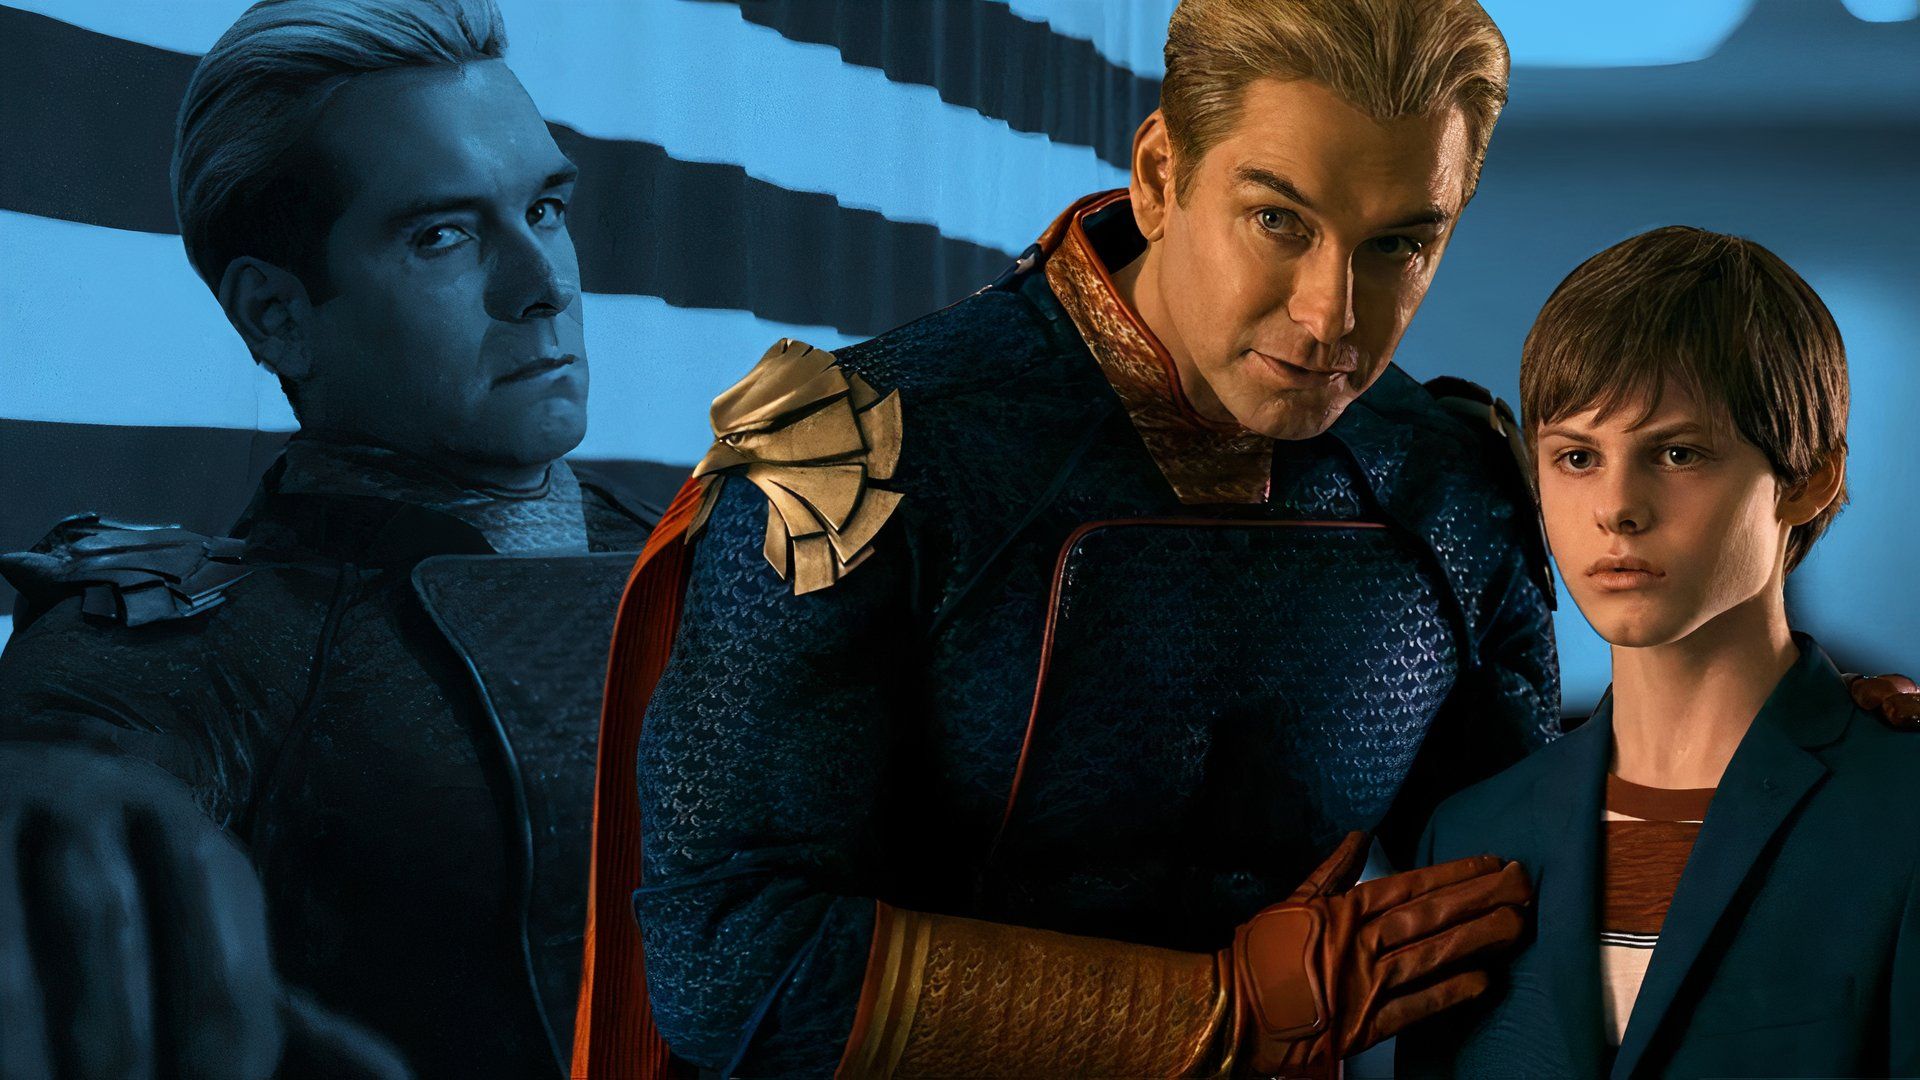 An edited image of Antony Starr as Homelander and Cameron Crovetti as Ryan in The Boys